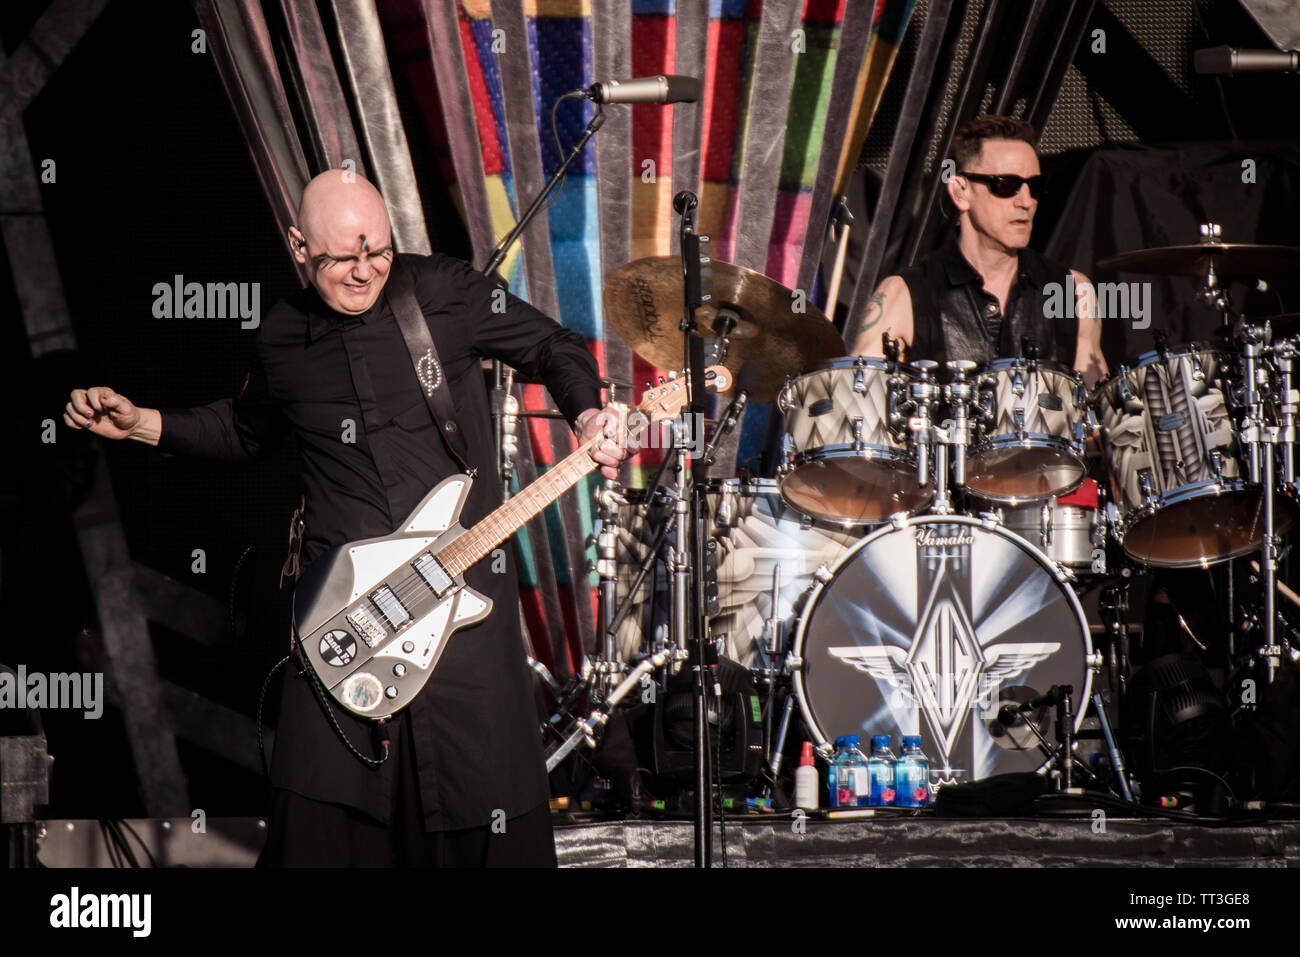 Billy Corgan and Jimmy Chamberlin of the American rock band Smashing Pumpkins, performing live on stage at the Firenze Rocks festival 2019 in Florence Stock Photo